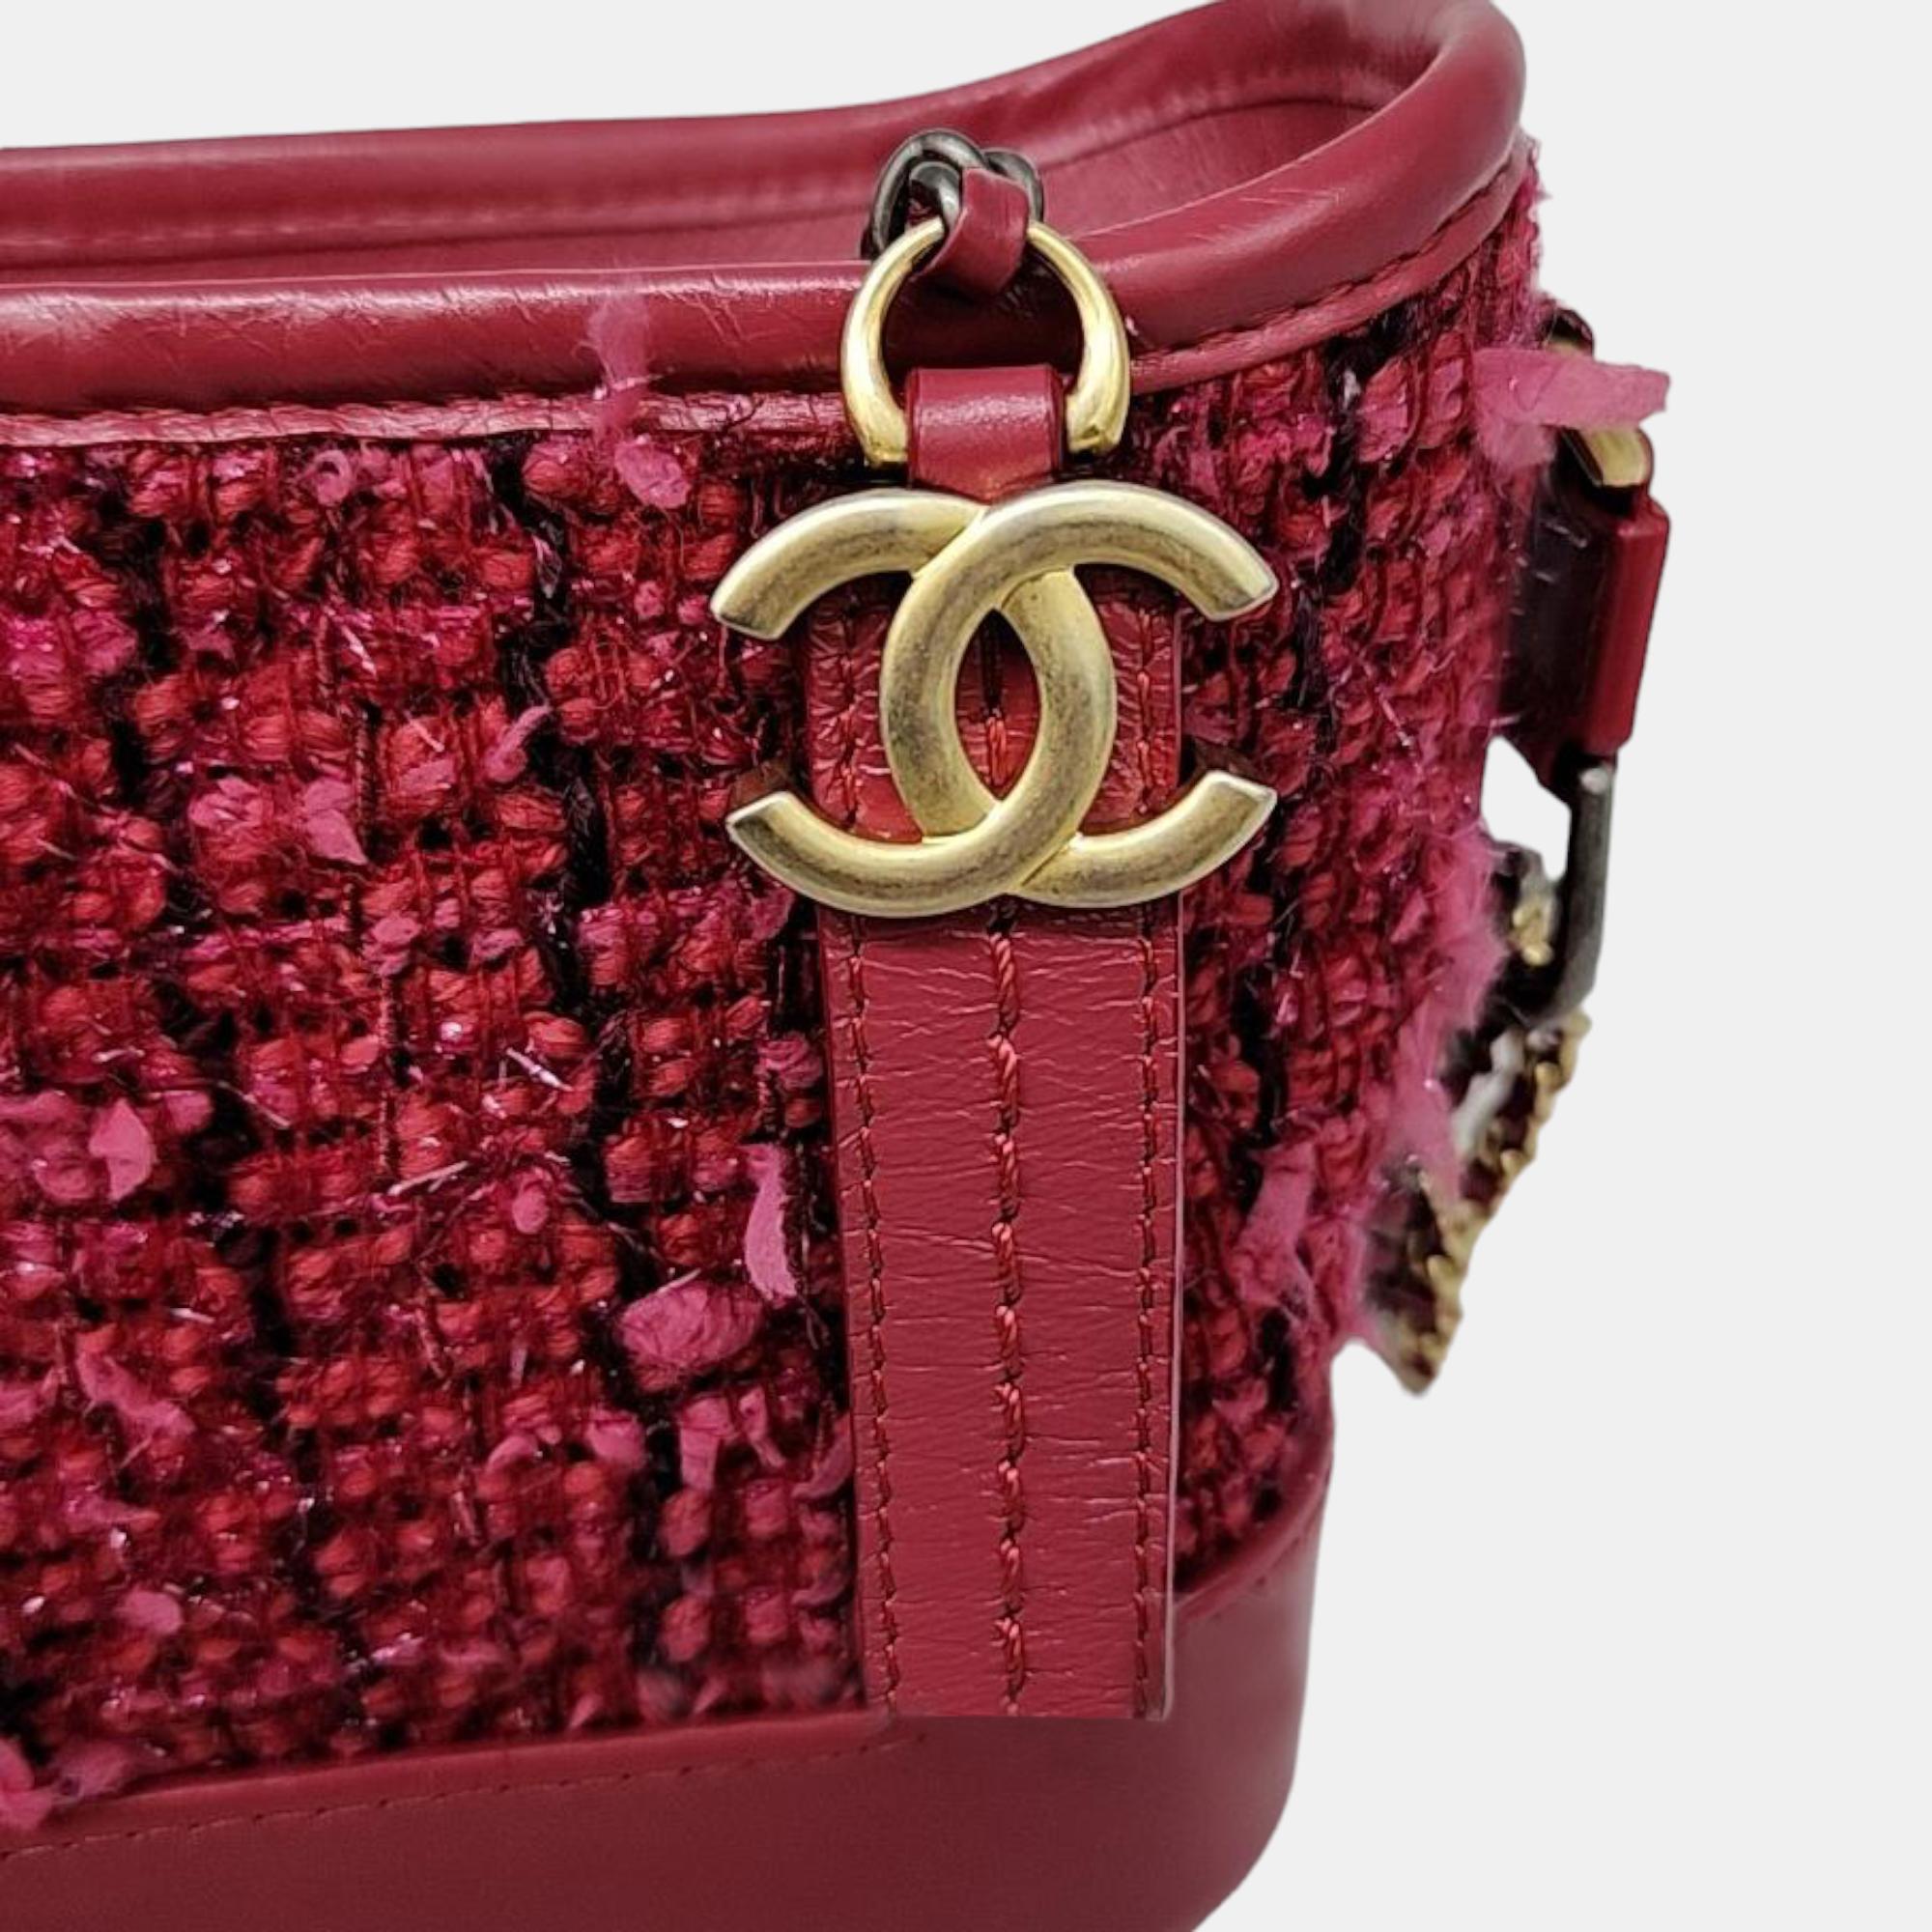 Chanel Pink Tweed Leather Small Gabrielle Shoulder Bag